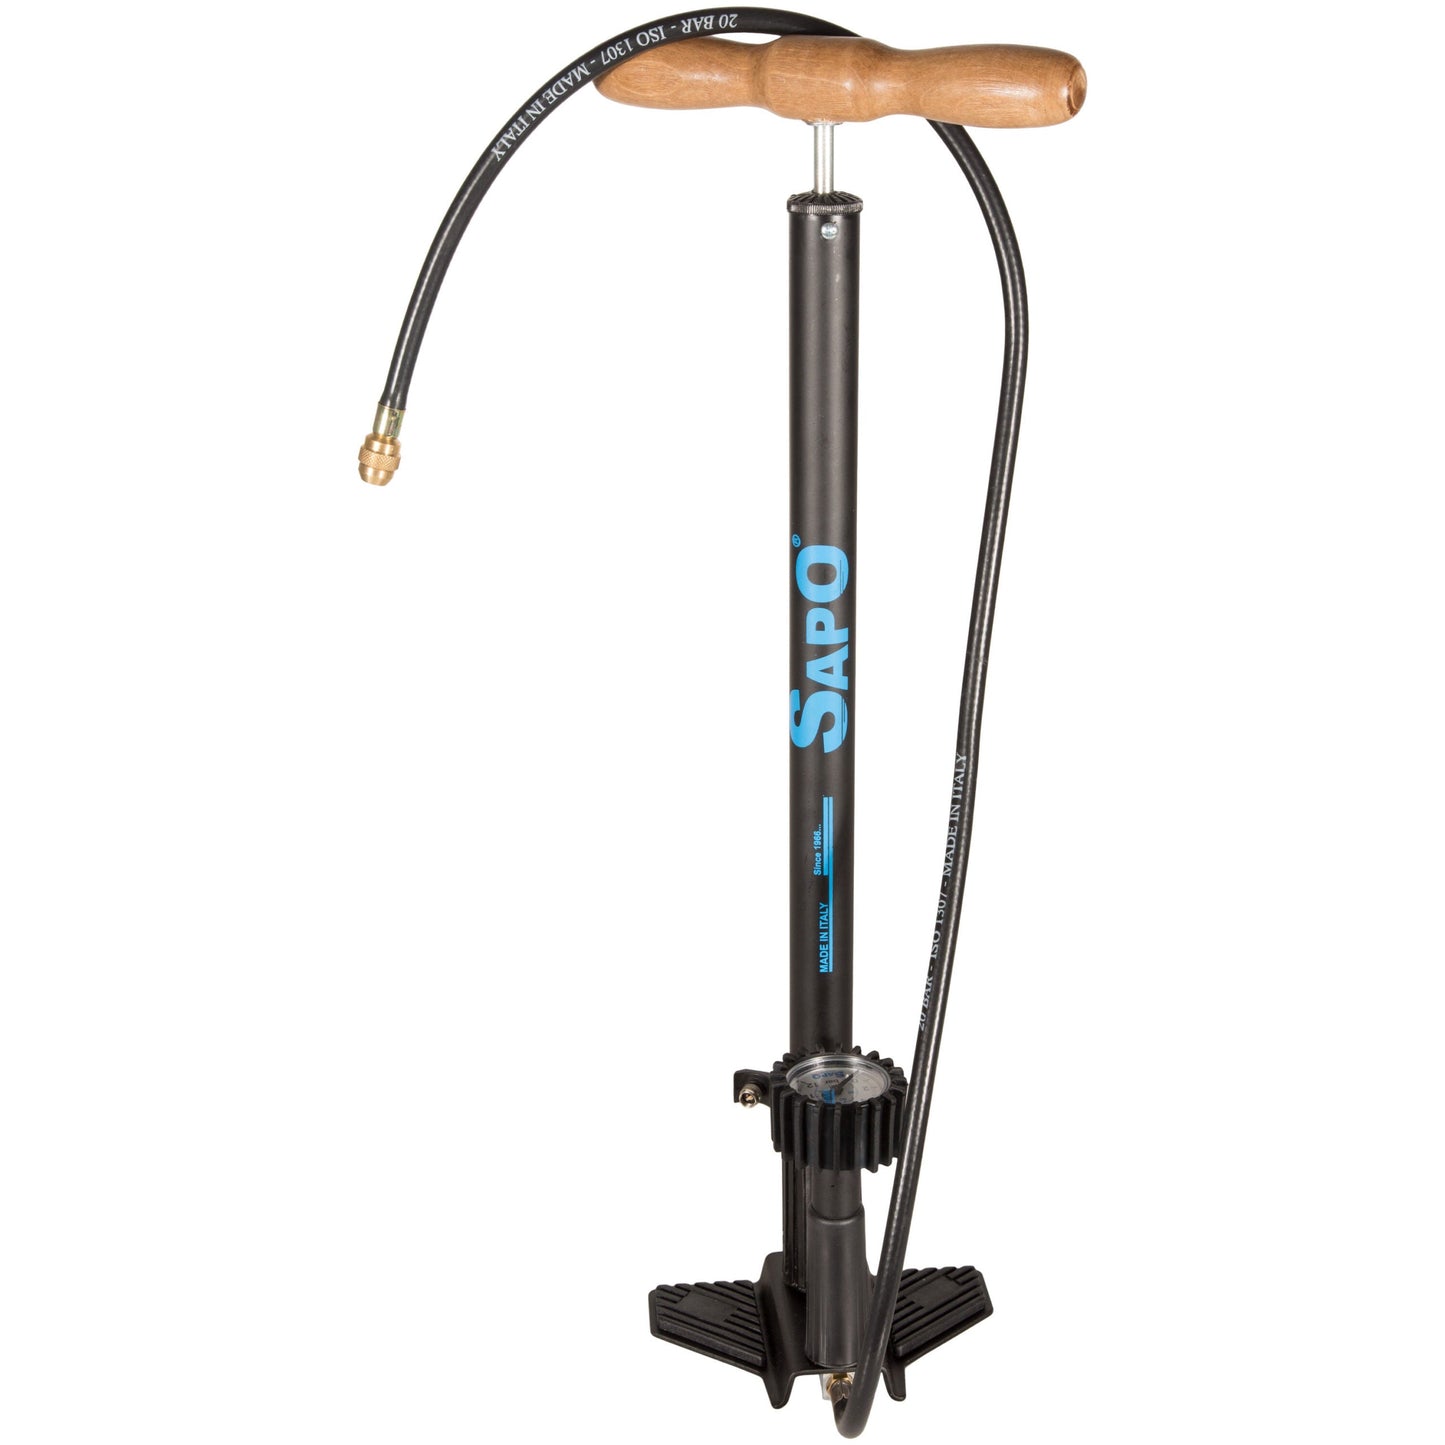 Sapo Ok Plus Floor Pump W/Pressure Gauge, Tank And Chromed Rubber Protection W/Wooden Handle 12 Bar/180 Psi